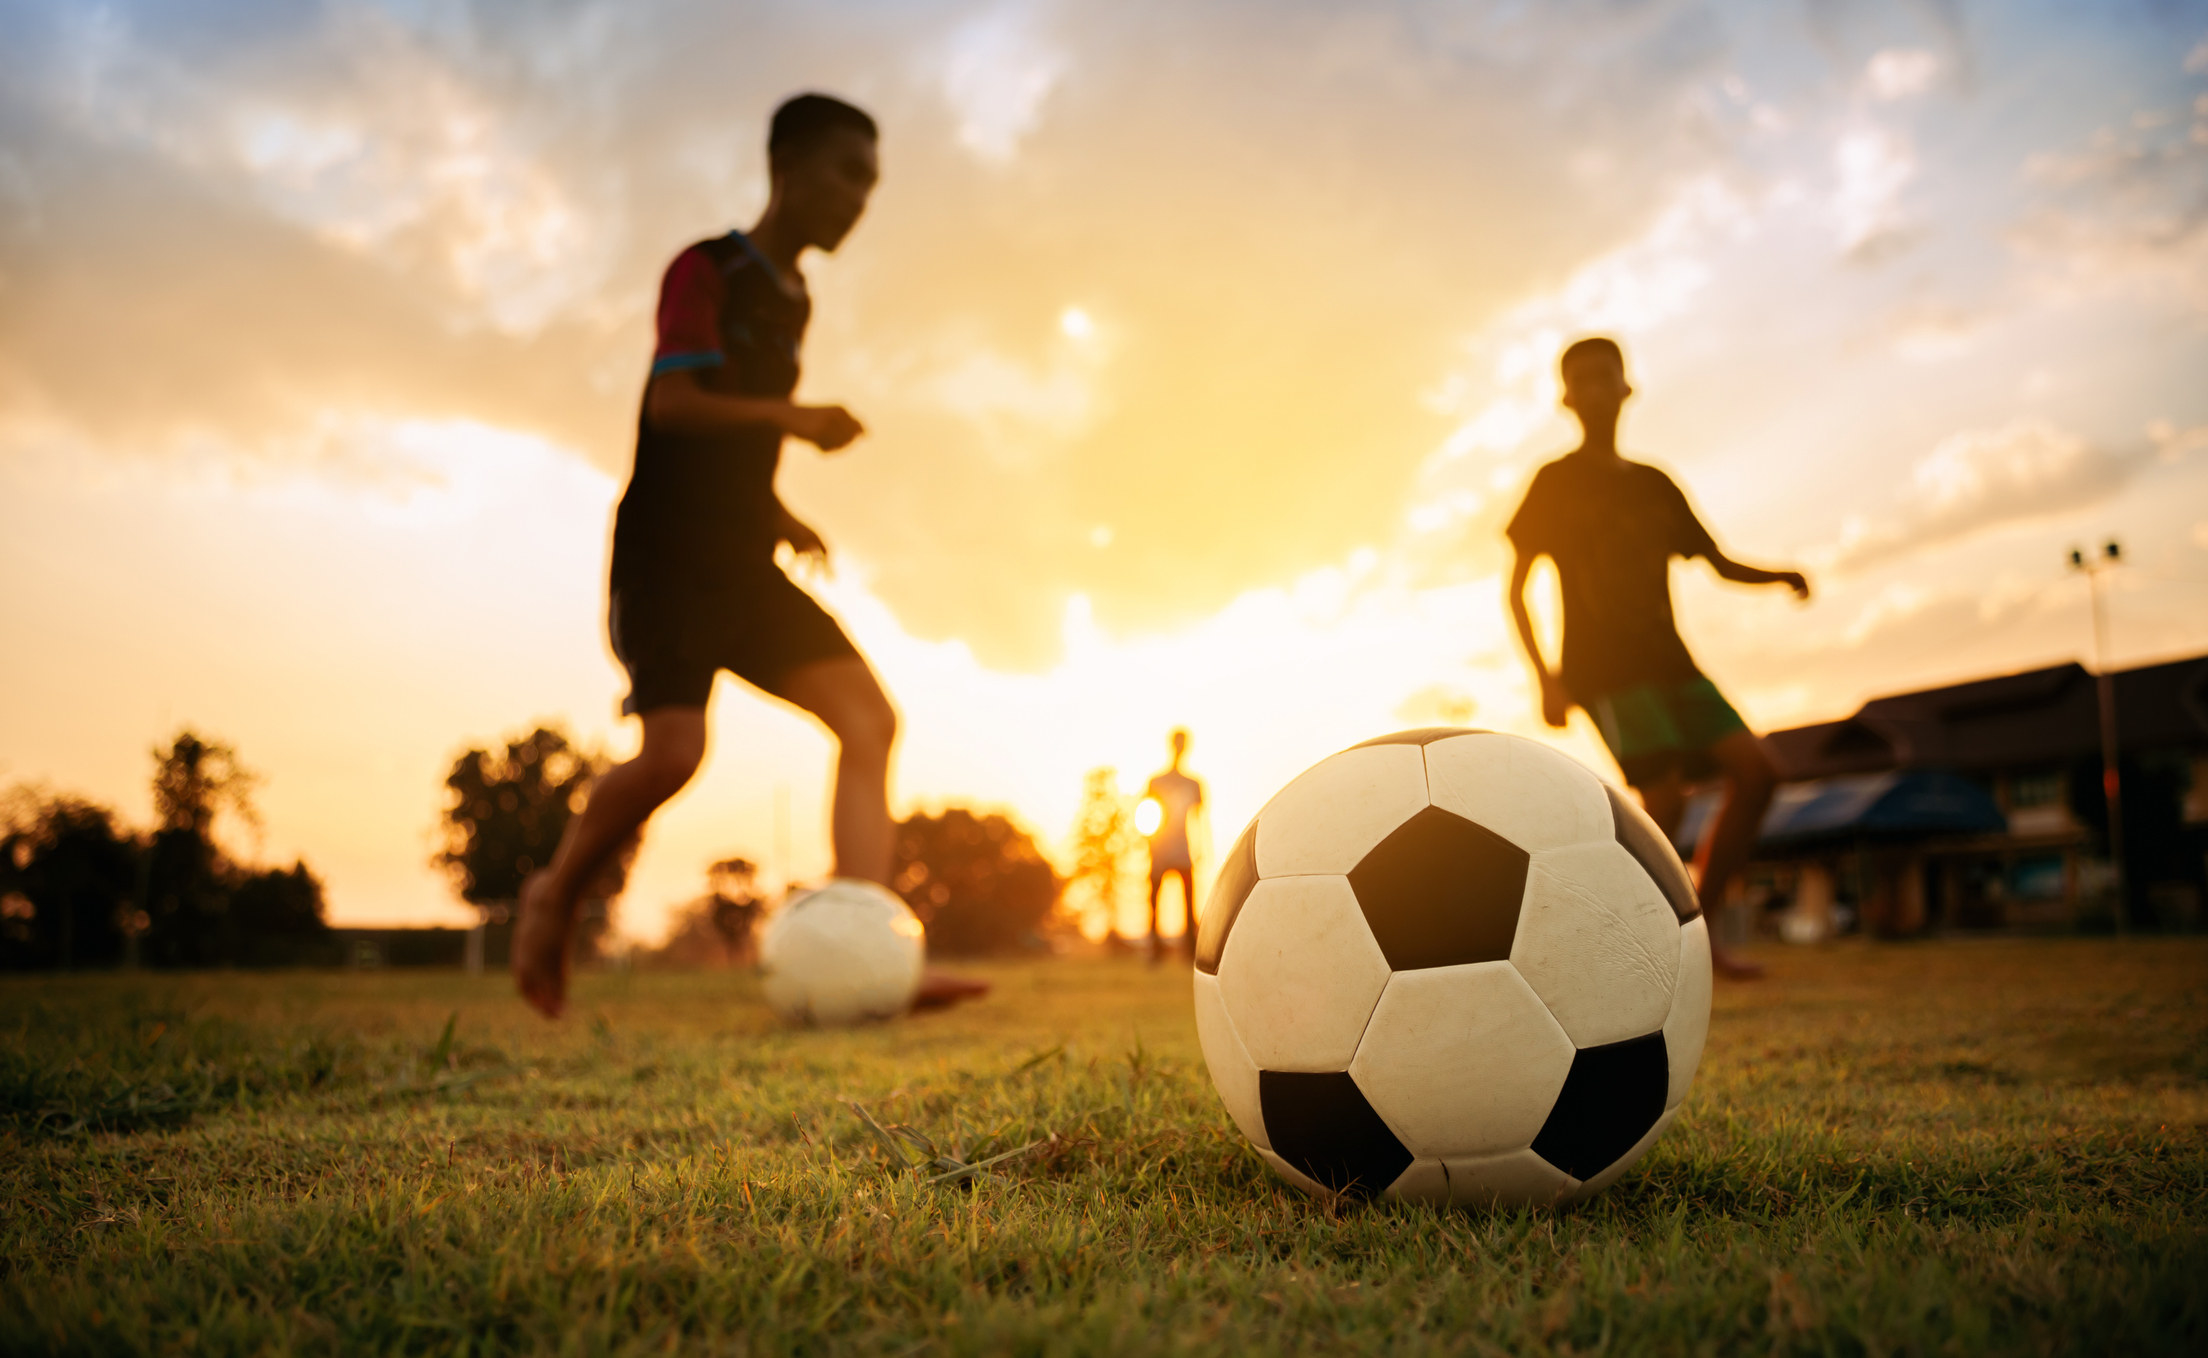 Photo of people playing soccer outdoors, the photo is mostly out of focus except to show the soccer ball laying on the grass